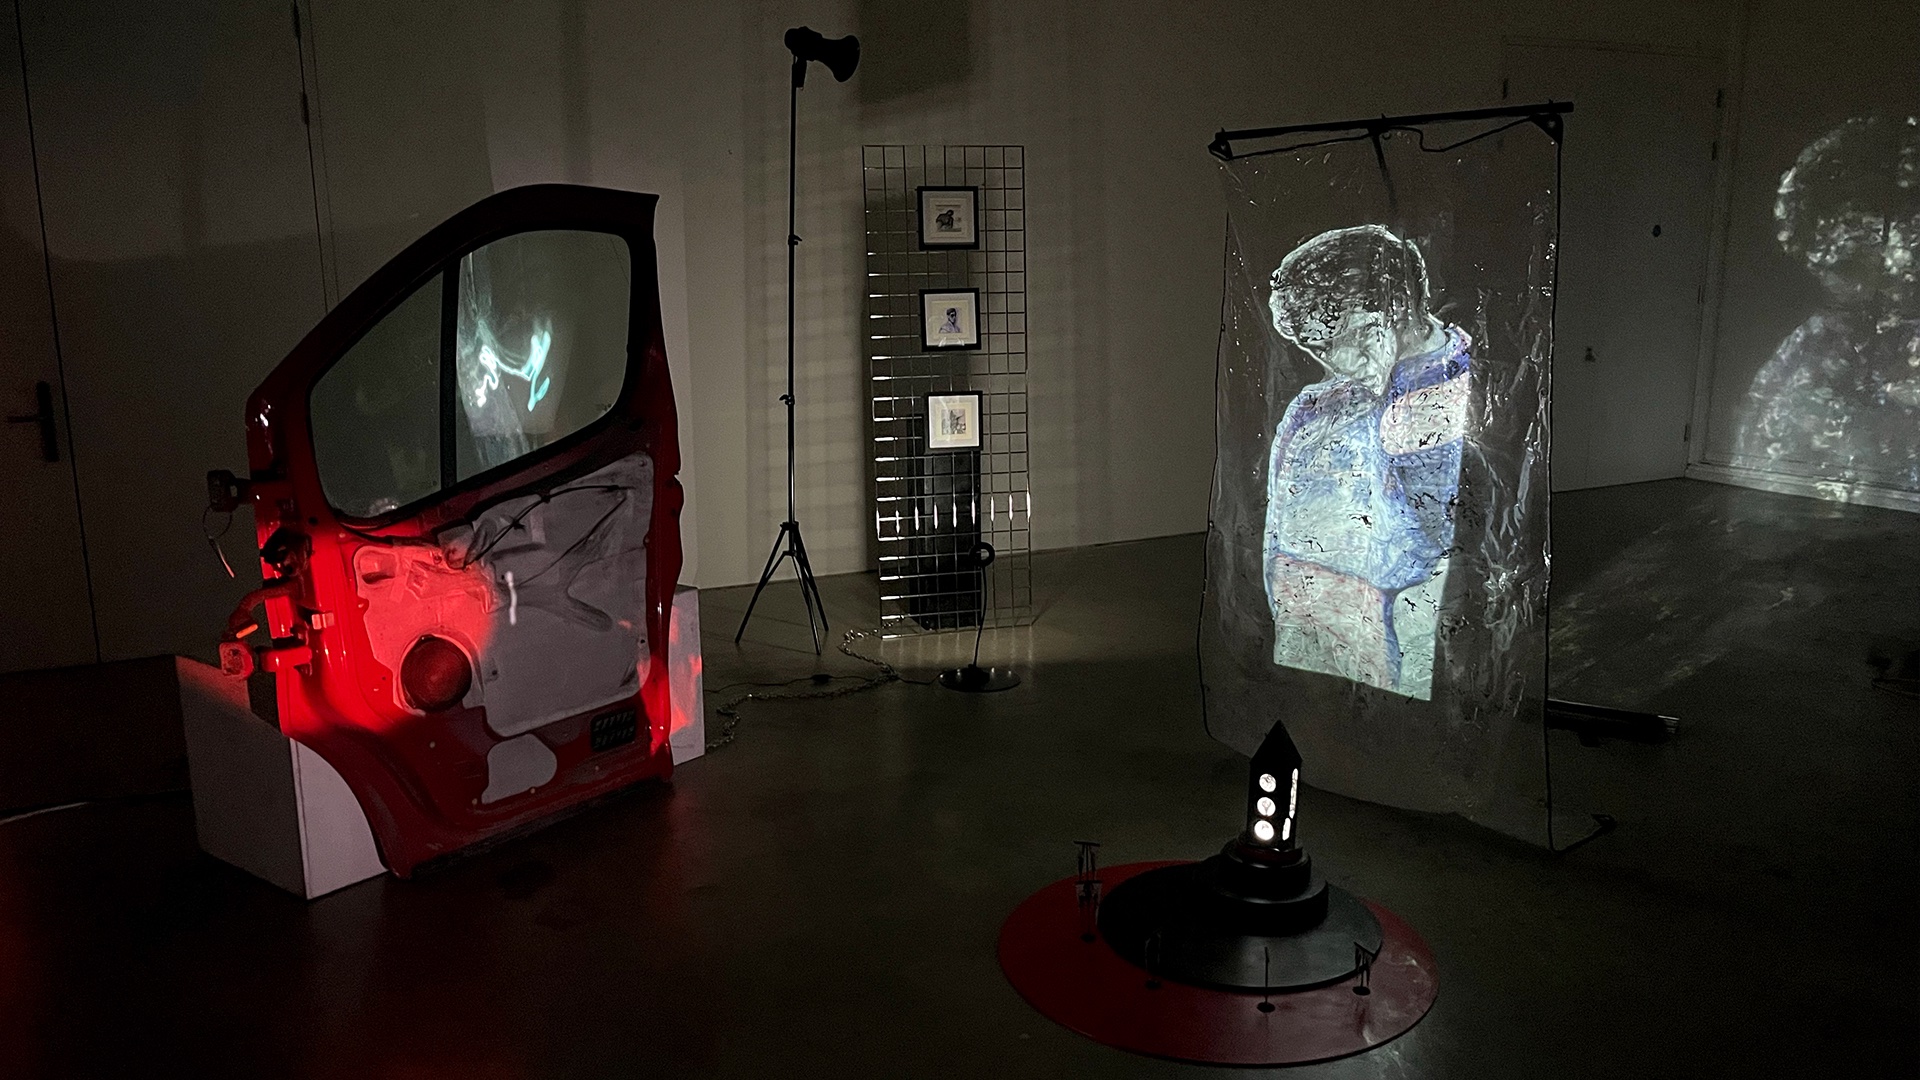 An installation in a dark room featuring a light projection of a matador drawing.